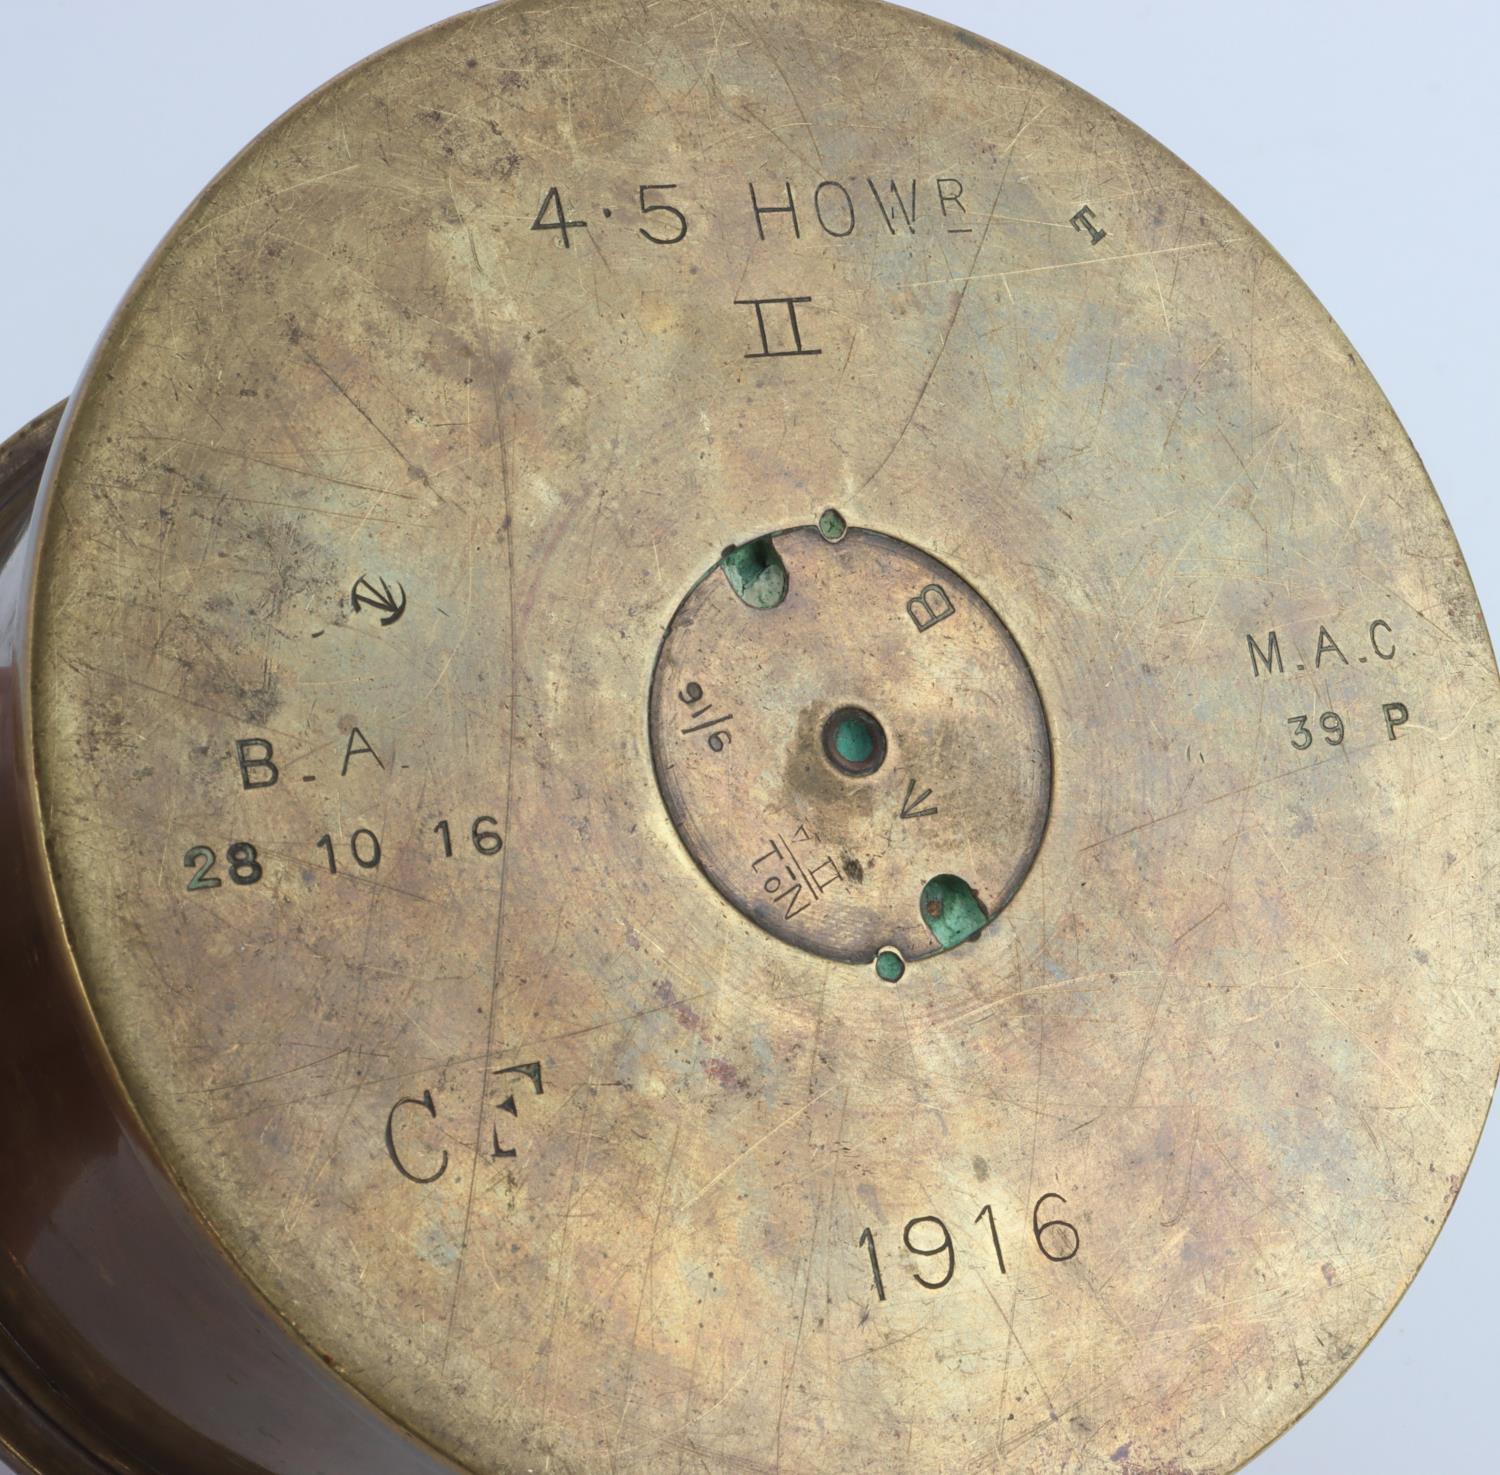 BBC - A History of the World - Object : A brass 4.5 Howitzer shell case